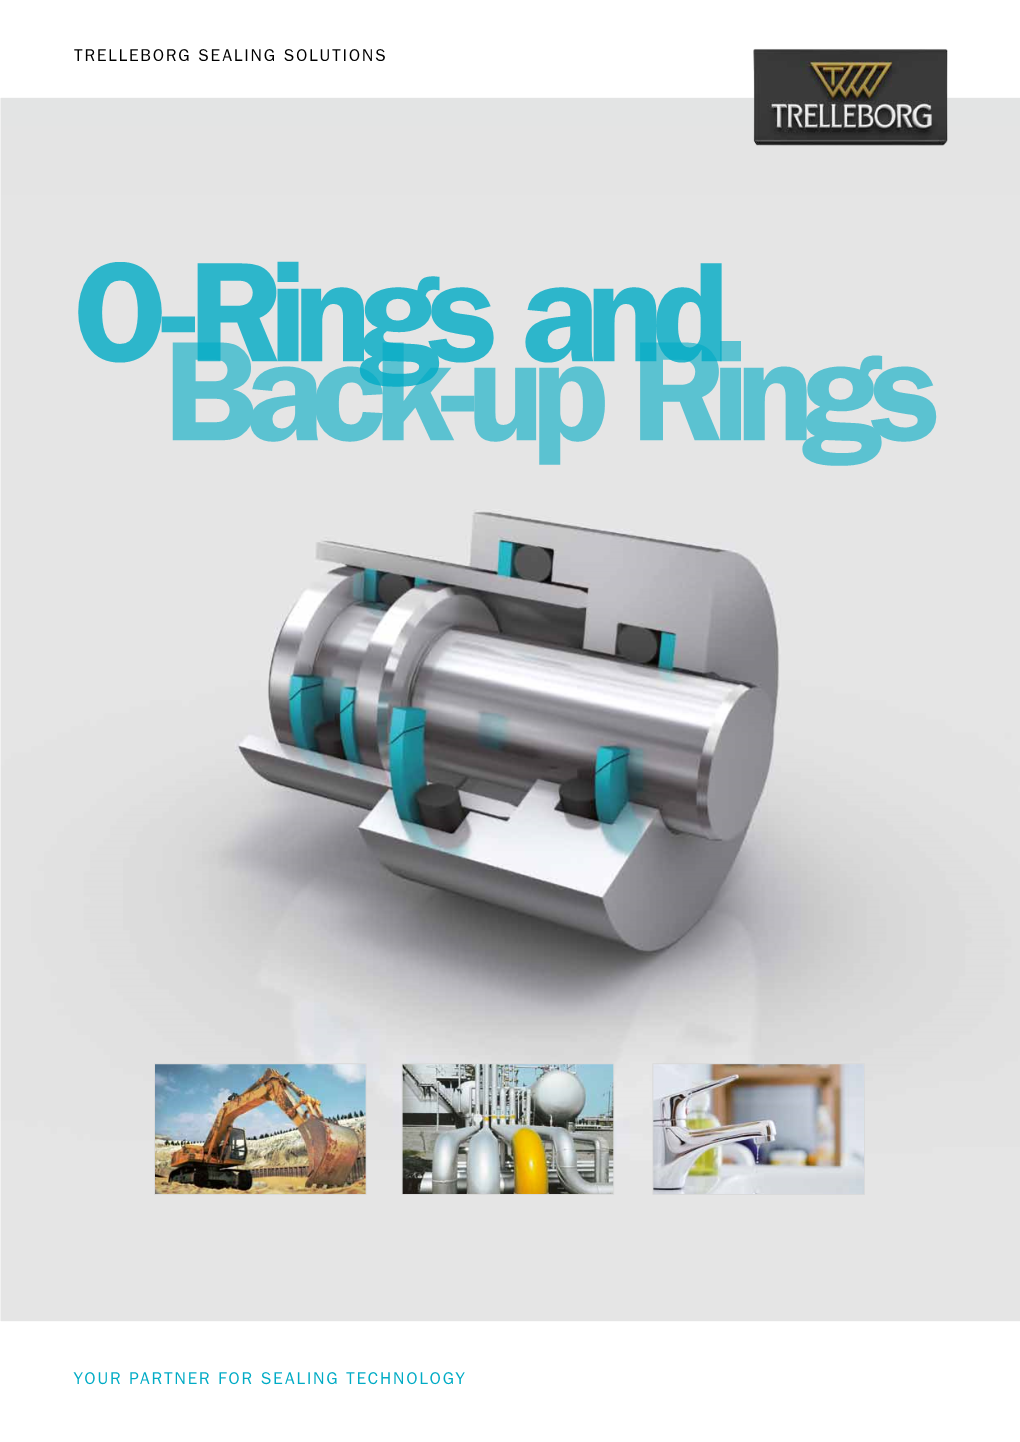 O-Rings and Back-Up Rings